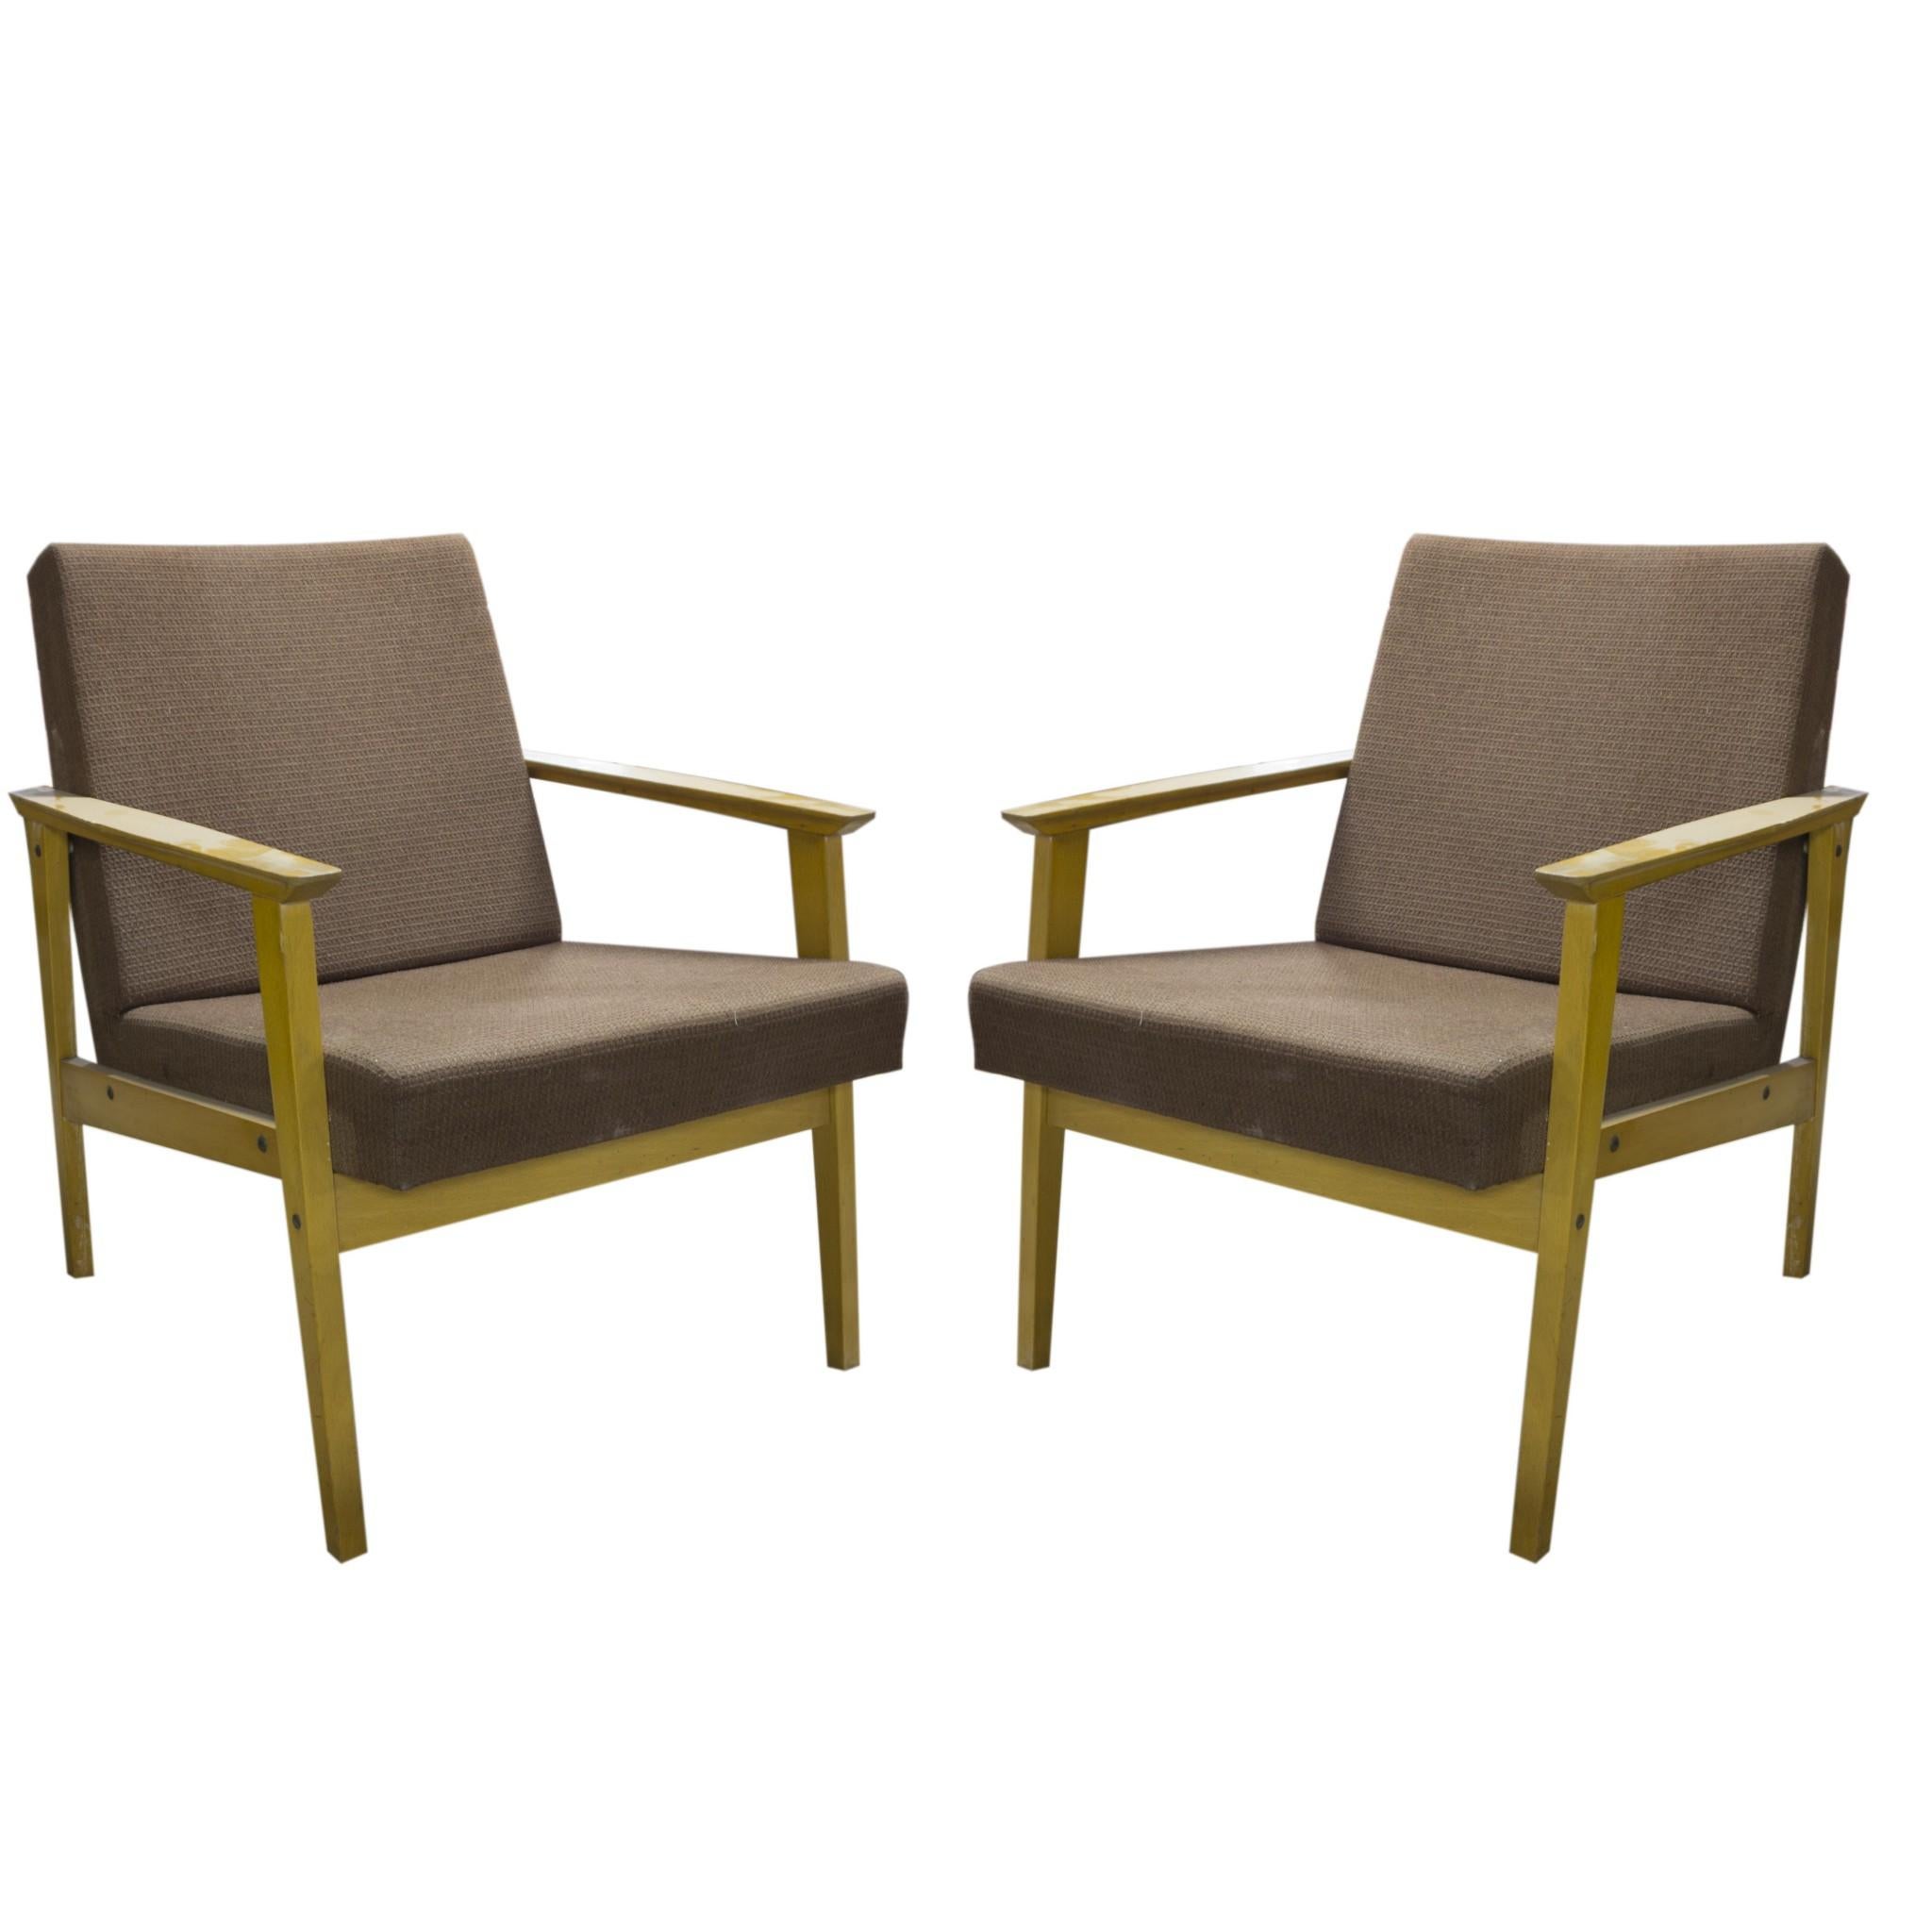 A pair of armchairs, made in the former Czechoslovakia in the 1970s. It was designed by Jirí Jiroutek for Interiér Praha as part of U-550 living room set. The structure is made of beechwood and the chairs has original upholstery. The chairs are in